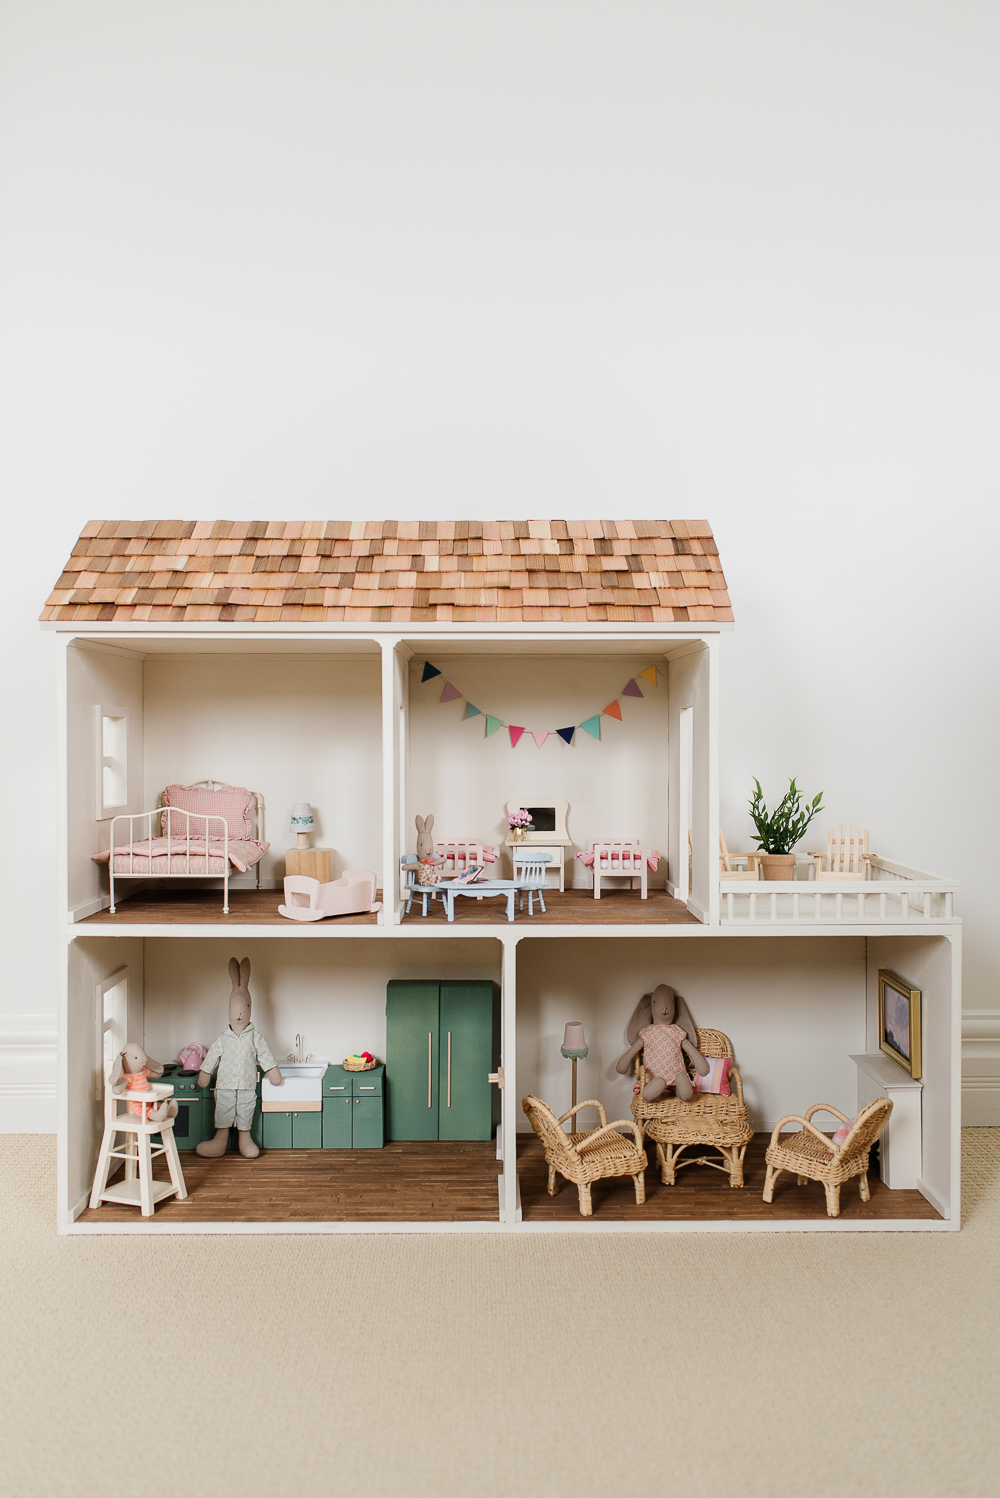 Inspire Yourself with These Ultra-Realistic Dollhouse Miniatures